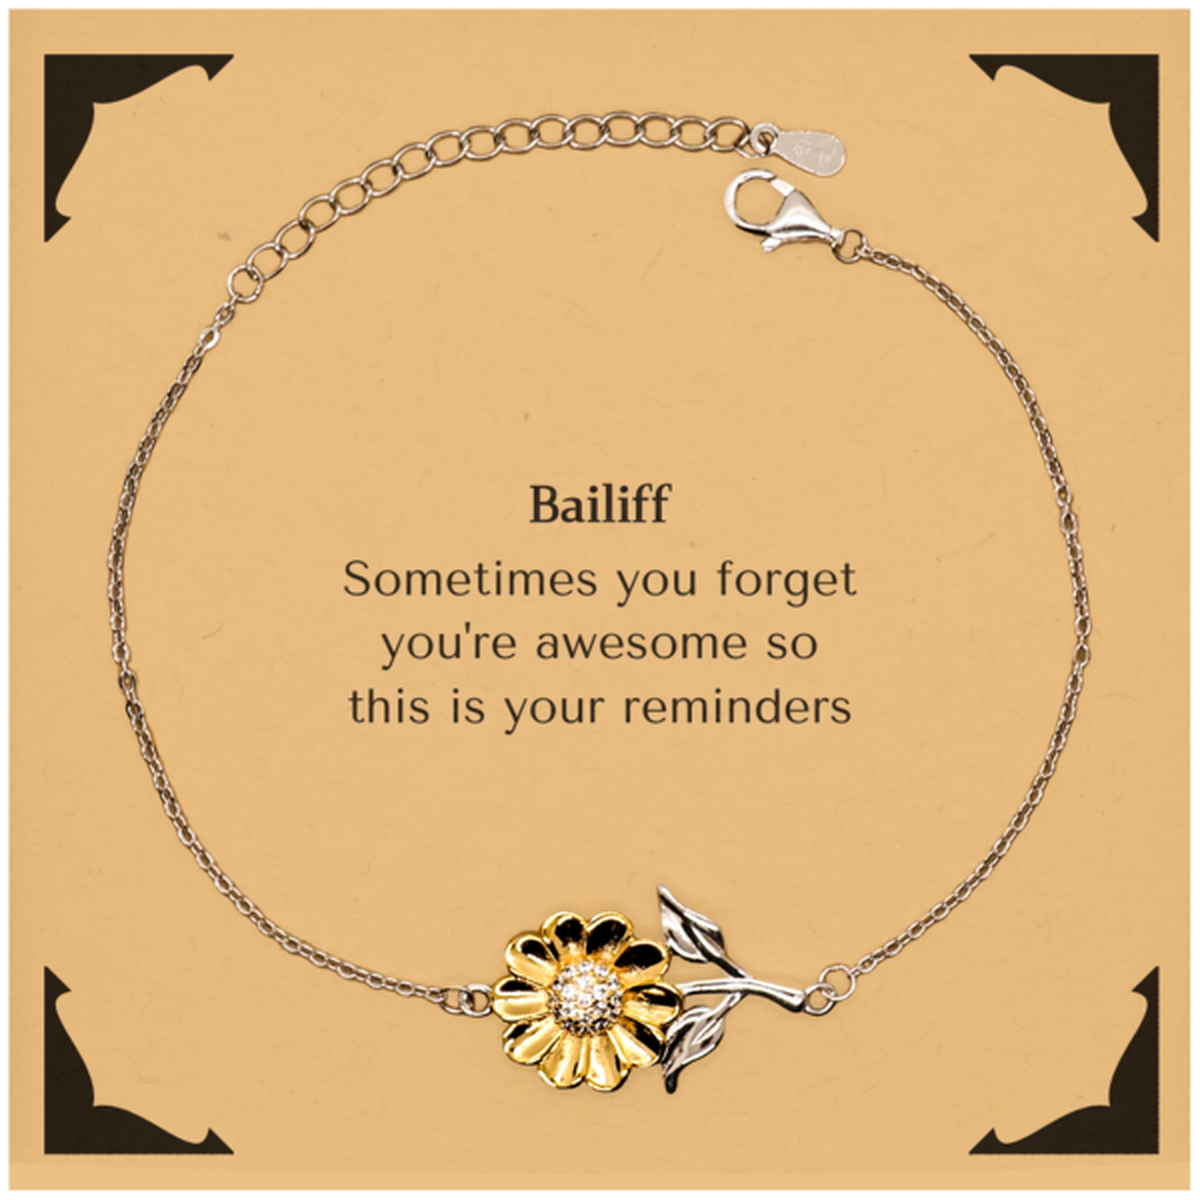 Sentimental Bailiff Sunflower Bracelet, Bailiff Sometimes you forget you're awesome so this is your reminders, Graduation Christmas Birthday Gifts for Bailiff, Men, Women, Coworkers